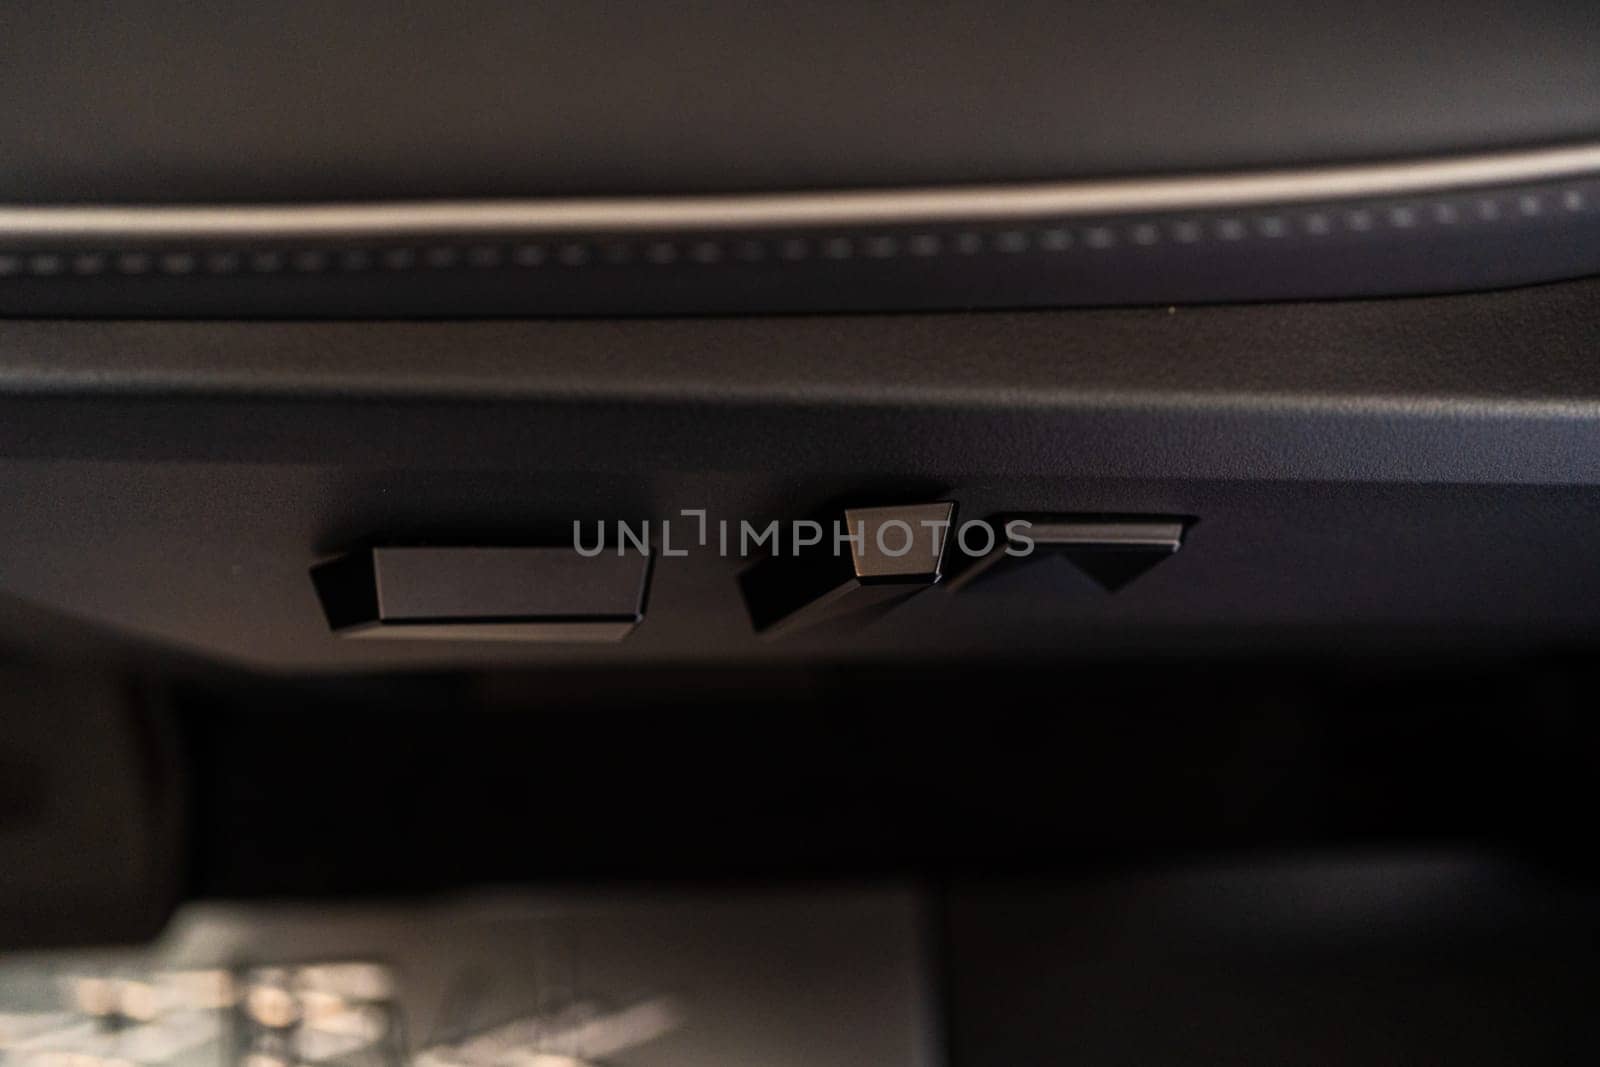 Denver, Colorado, USA-May 5, 2024-This image captures a close-up view of the seat adjustment buttons located in the Tesla Cybertruck, emphasizing the minimalist and sleek design of the vehicle interior controls.